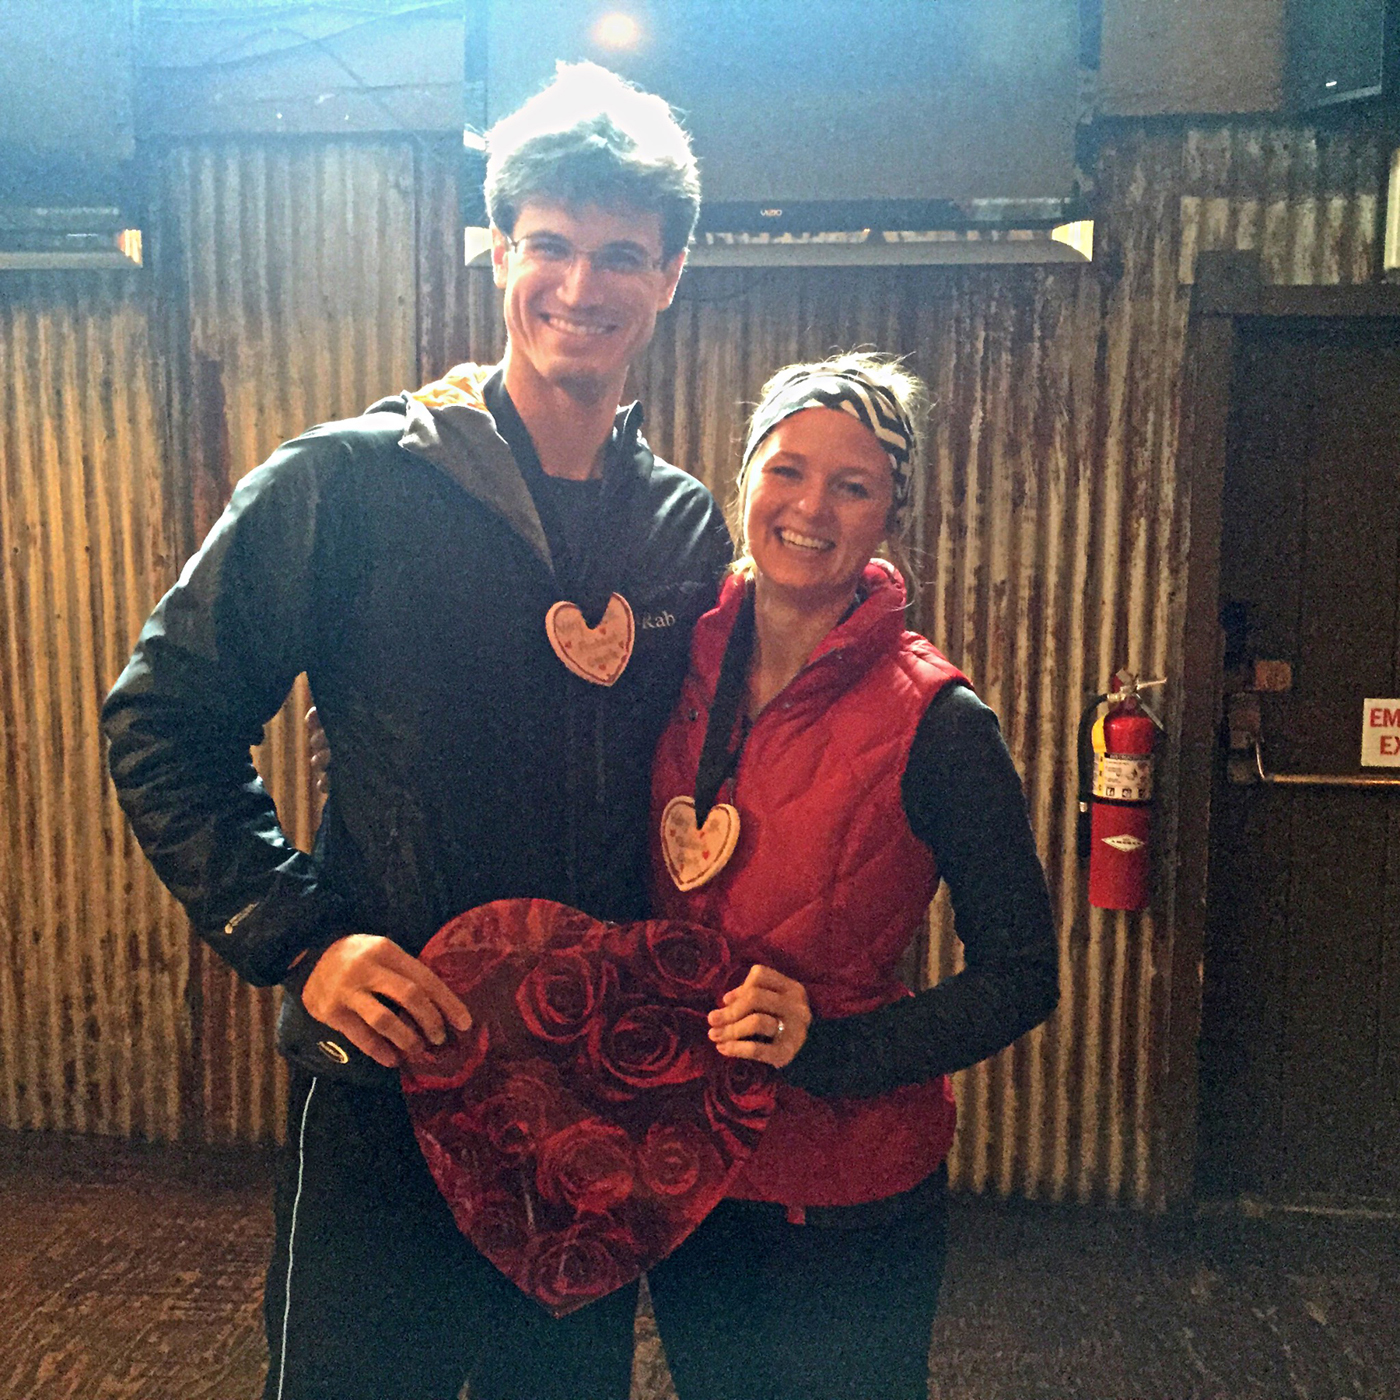 Garrett and Heidi Hooker were honored as the Kachemak Bay Running Club’s Valentine’s Day 5K fastest couple. Garrett came in fourth overall with a time of 23:04.1, while Heidi came in 13th overall with her time of 25:24.4.-Photo provided